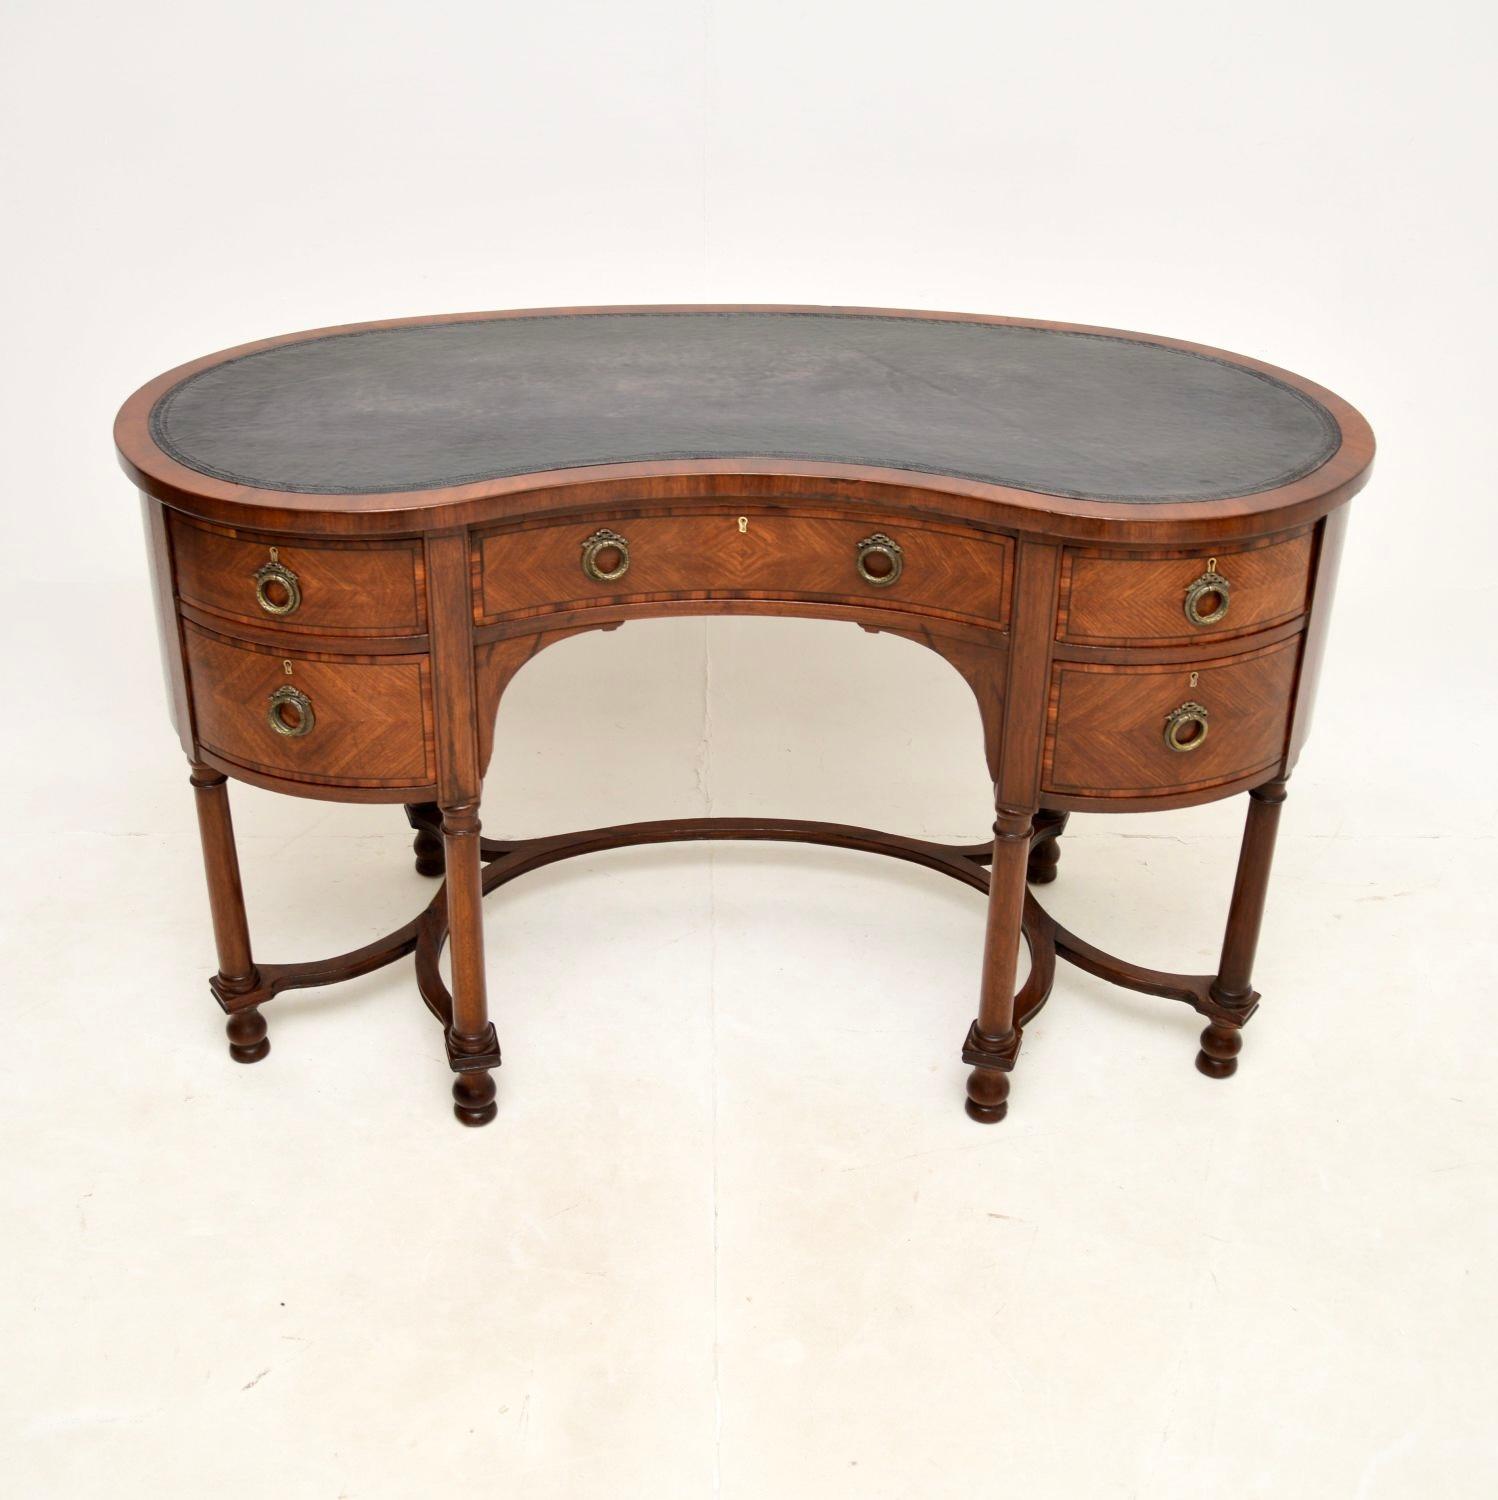 A beautiful antique kidney shaped desk. This was made in England, it dates from around the 1890-1910 period.

This actually has a brass plaque in the top drawer from when it was presented as a gift in 1947. The wood has walnut cross banding on the